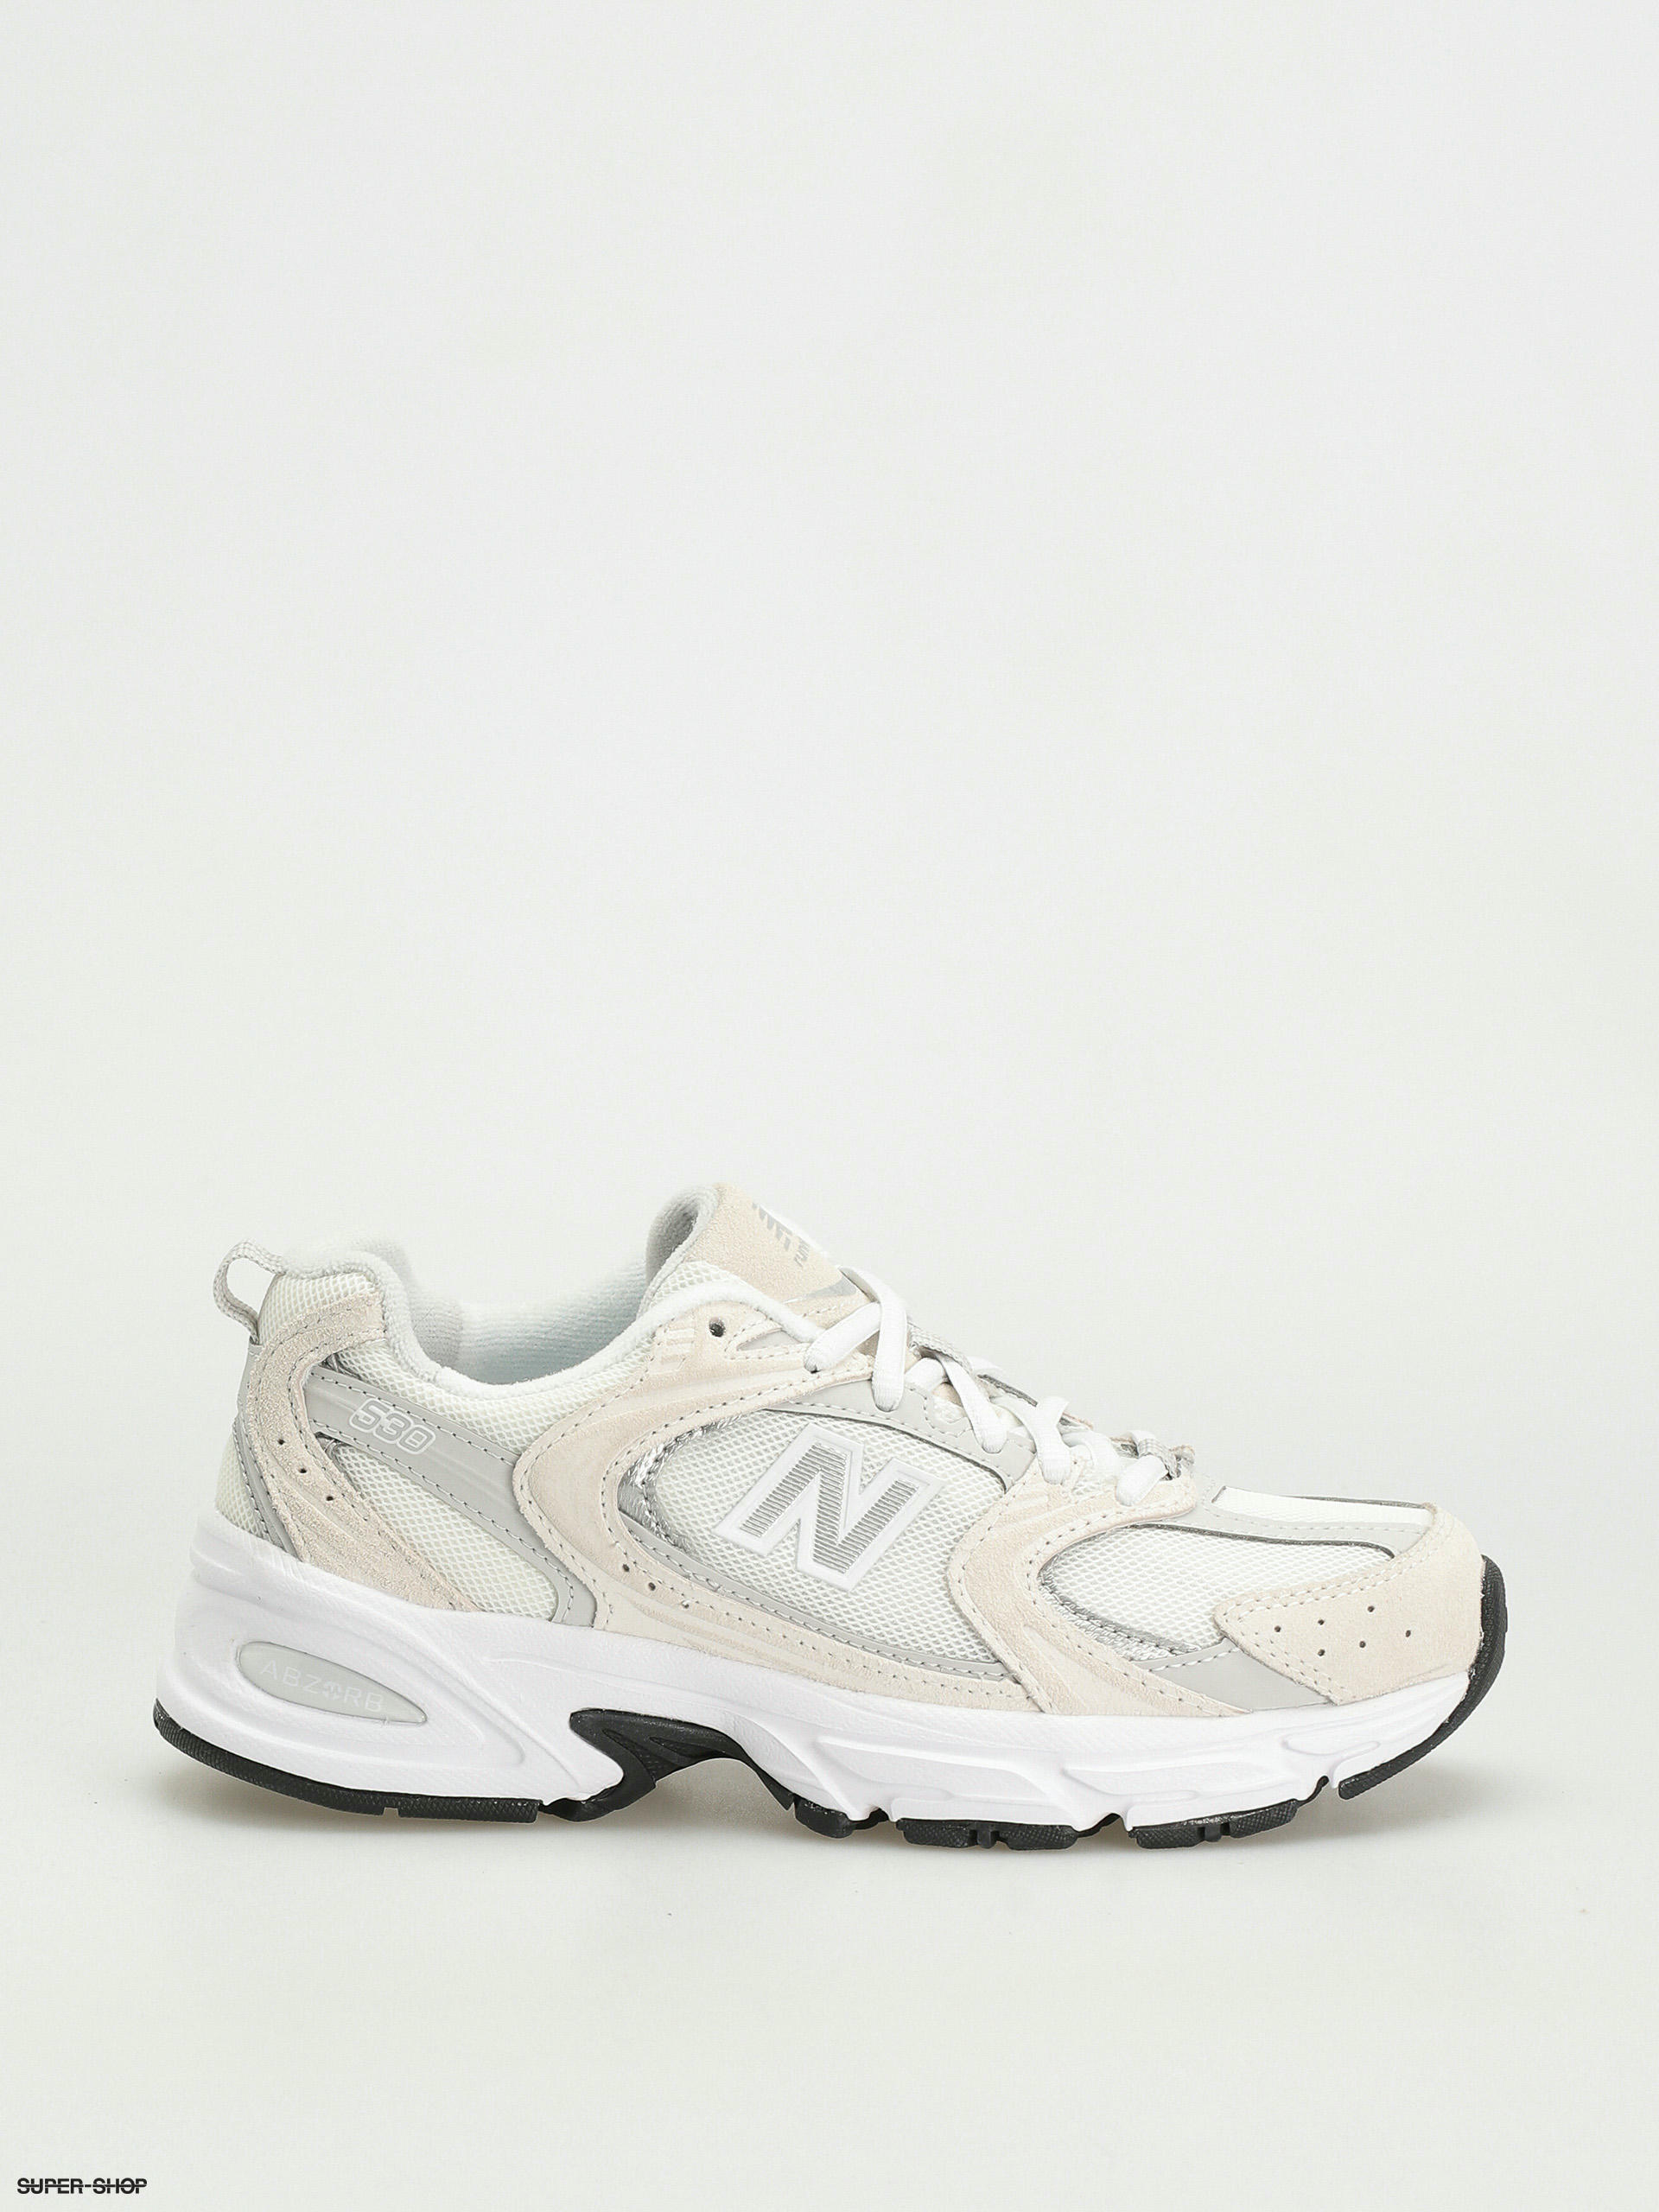 Women's Shoes styles | New Balance Singapore - Official Online Store - New  Balance